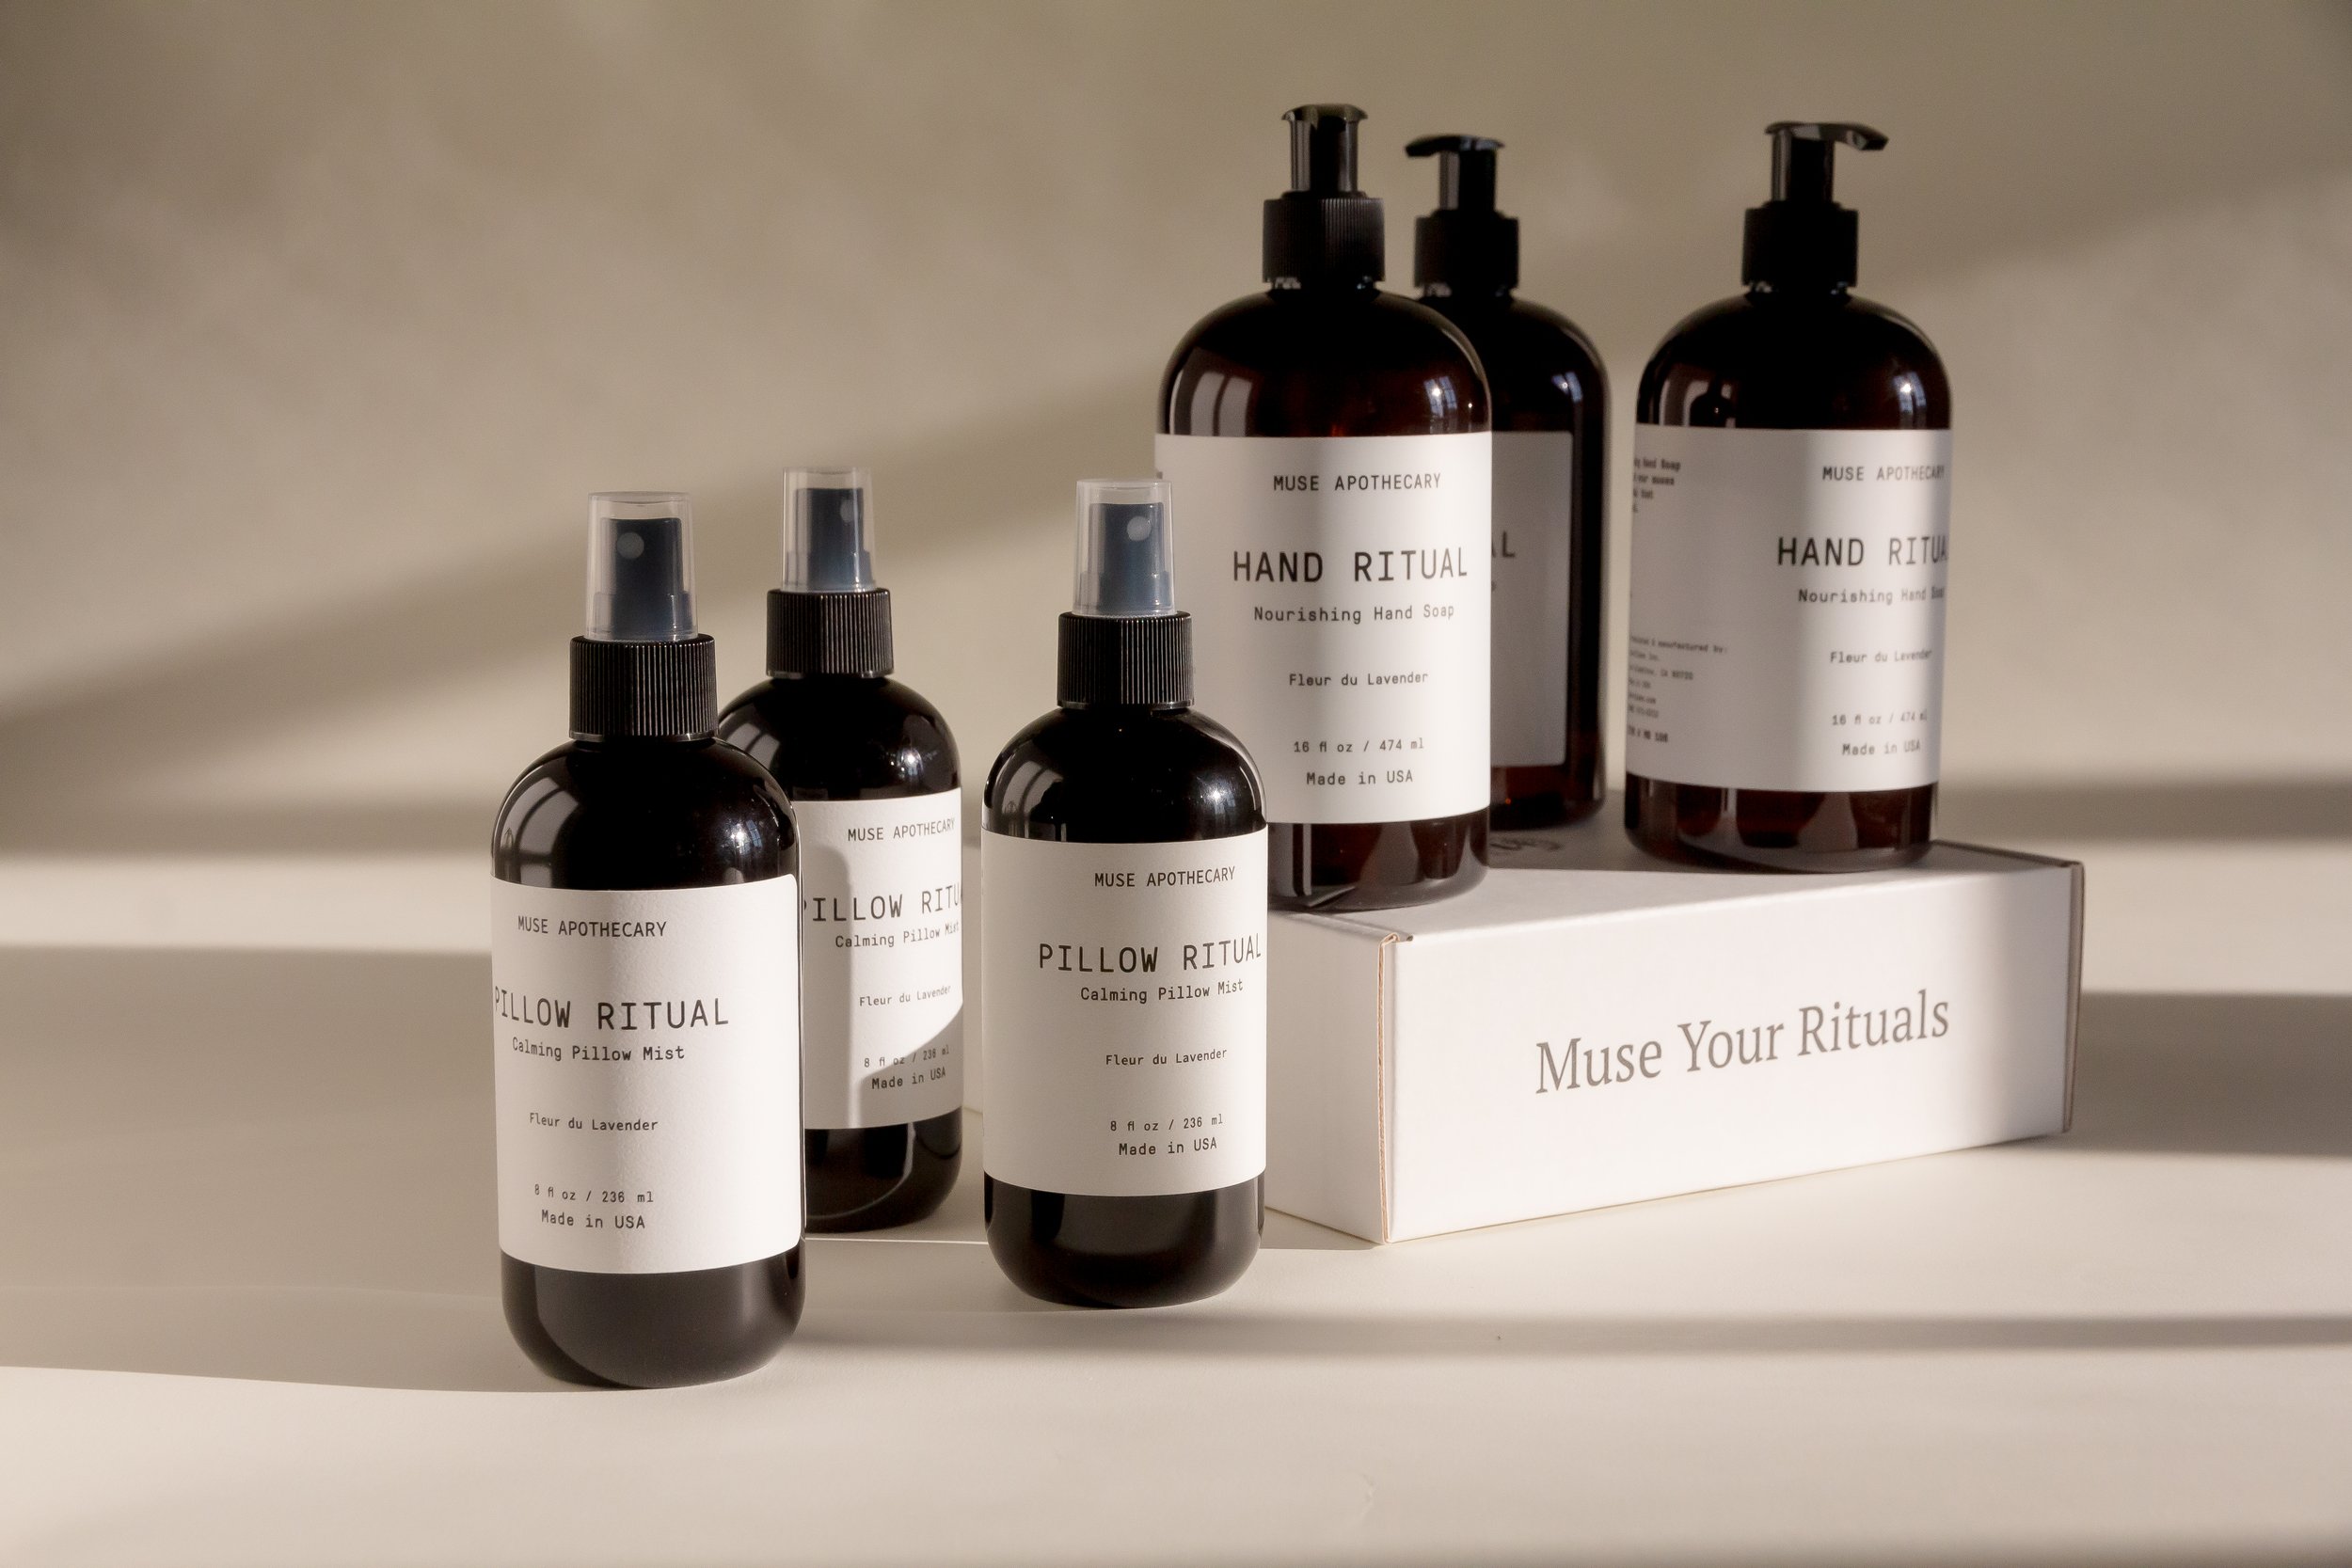 Muse Apothecary Flush Ritual Review